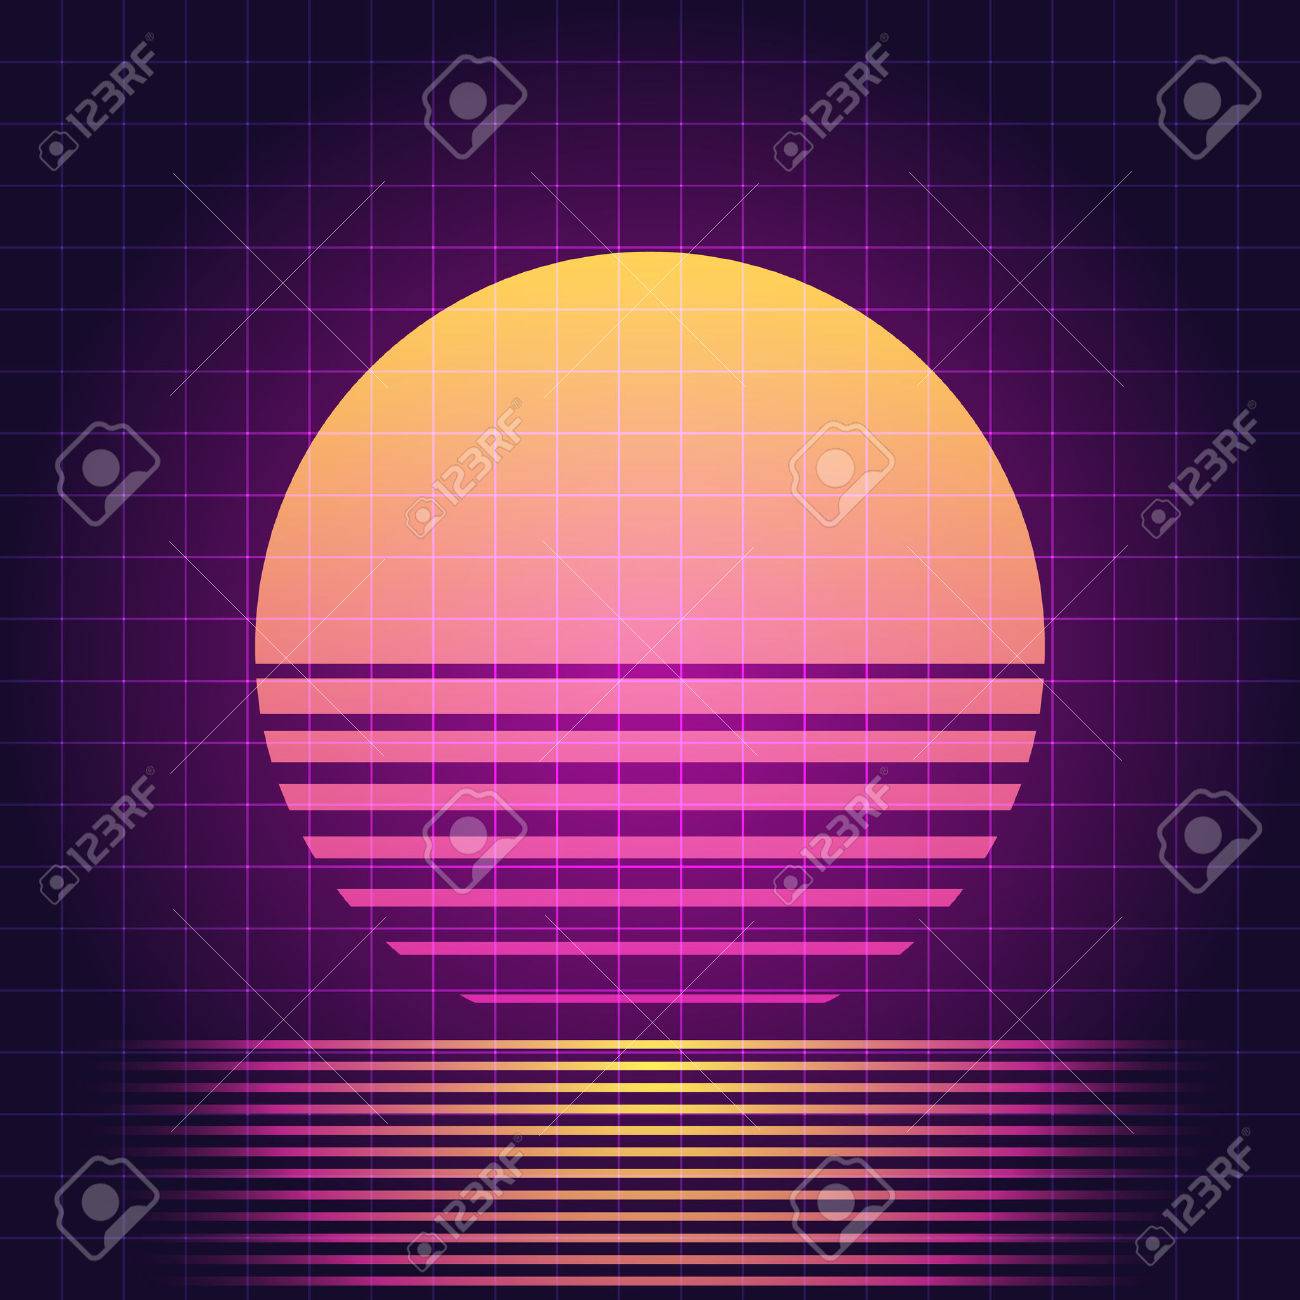 80s Retro Sci Fi Background Vhs Vector Eps10 Royalty